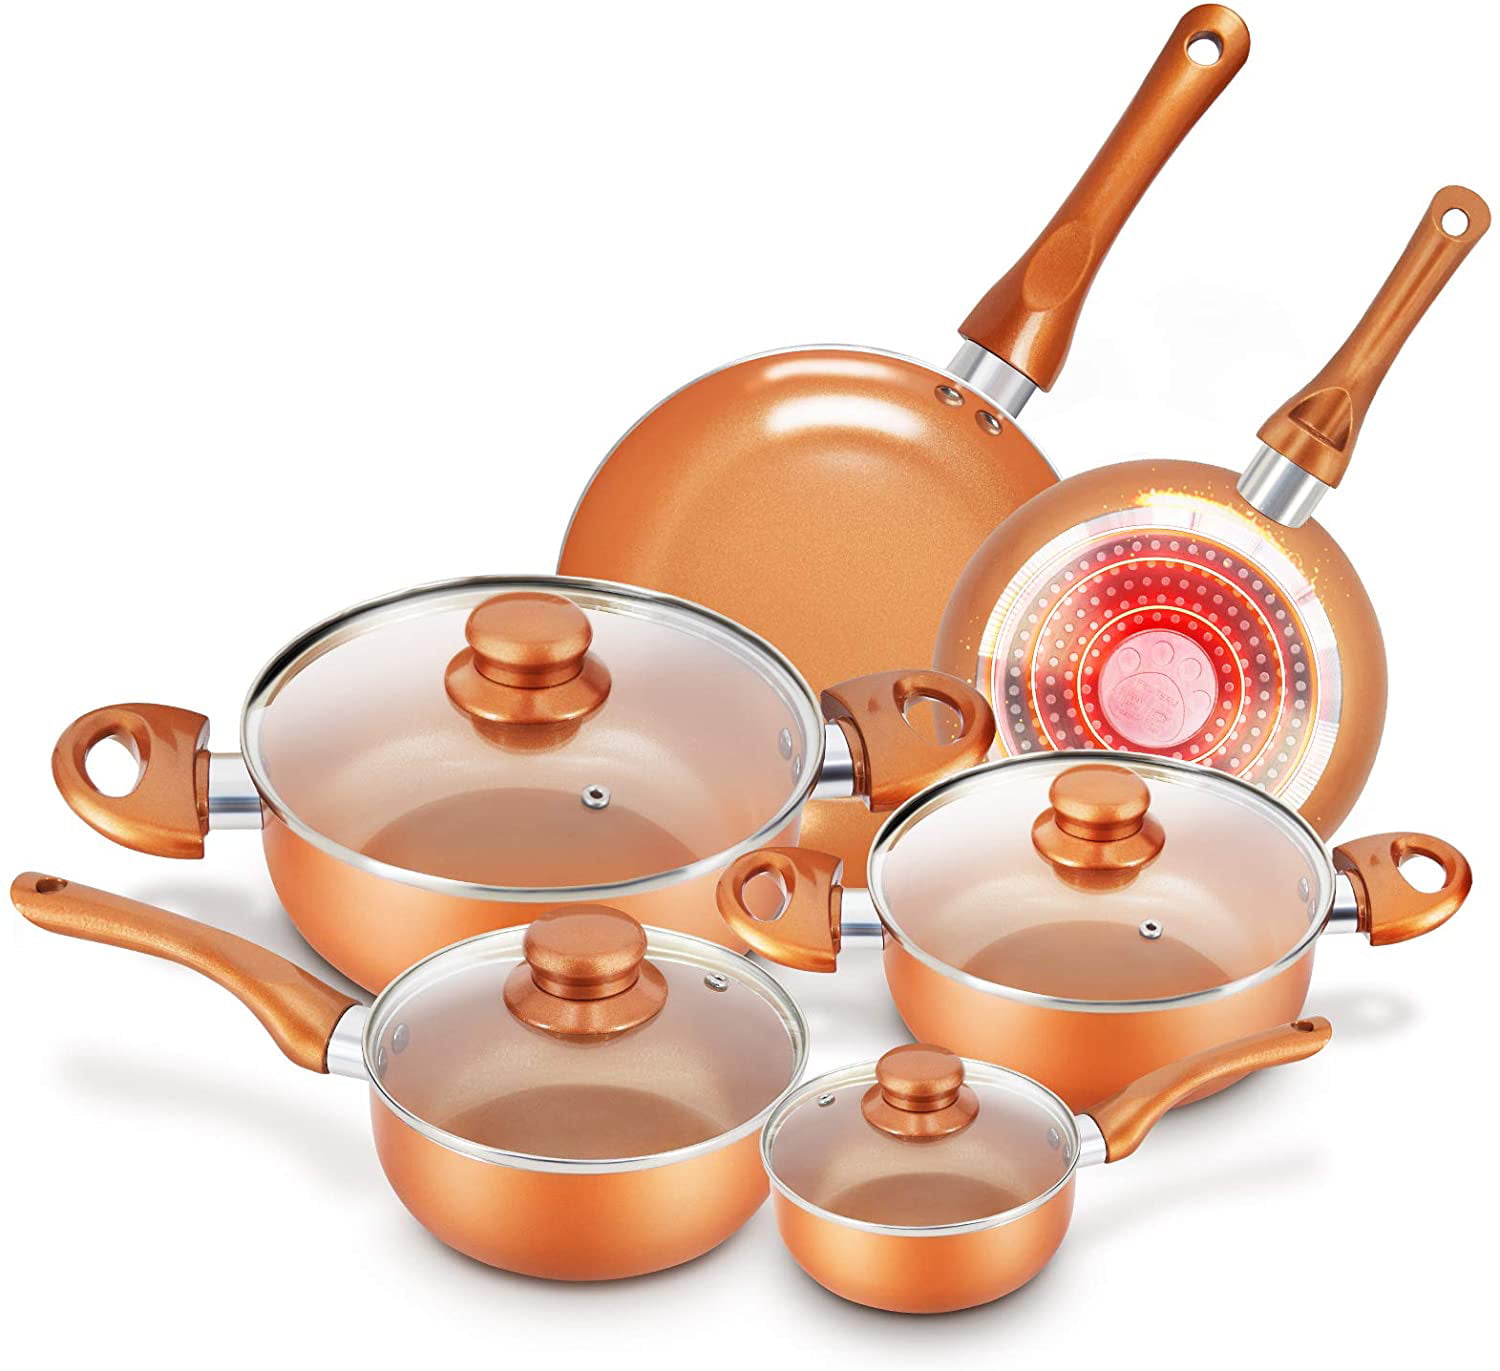 Kitchen Cooking Non-stick Copper Frying Pan Aluminum Coating Induction Skillet 